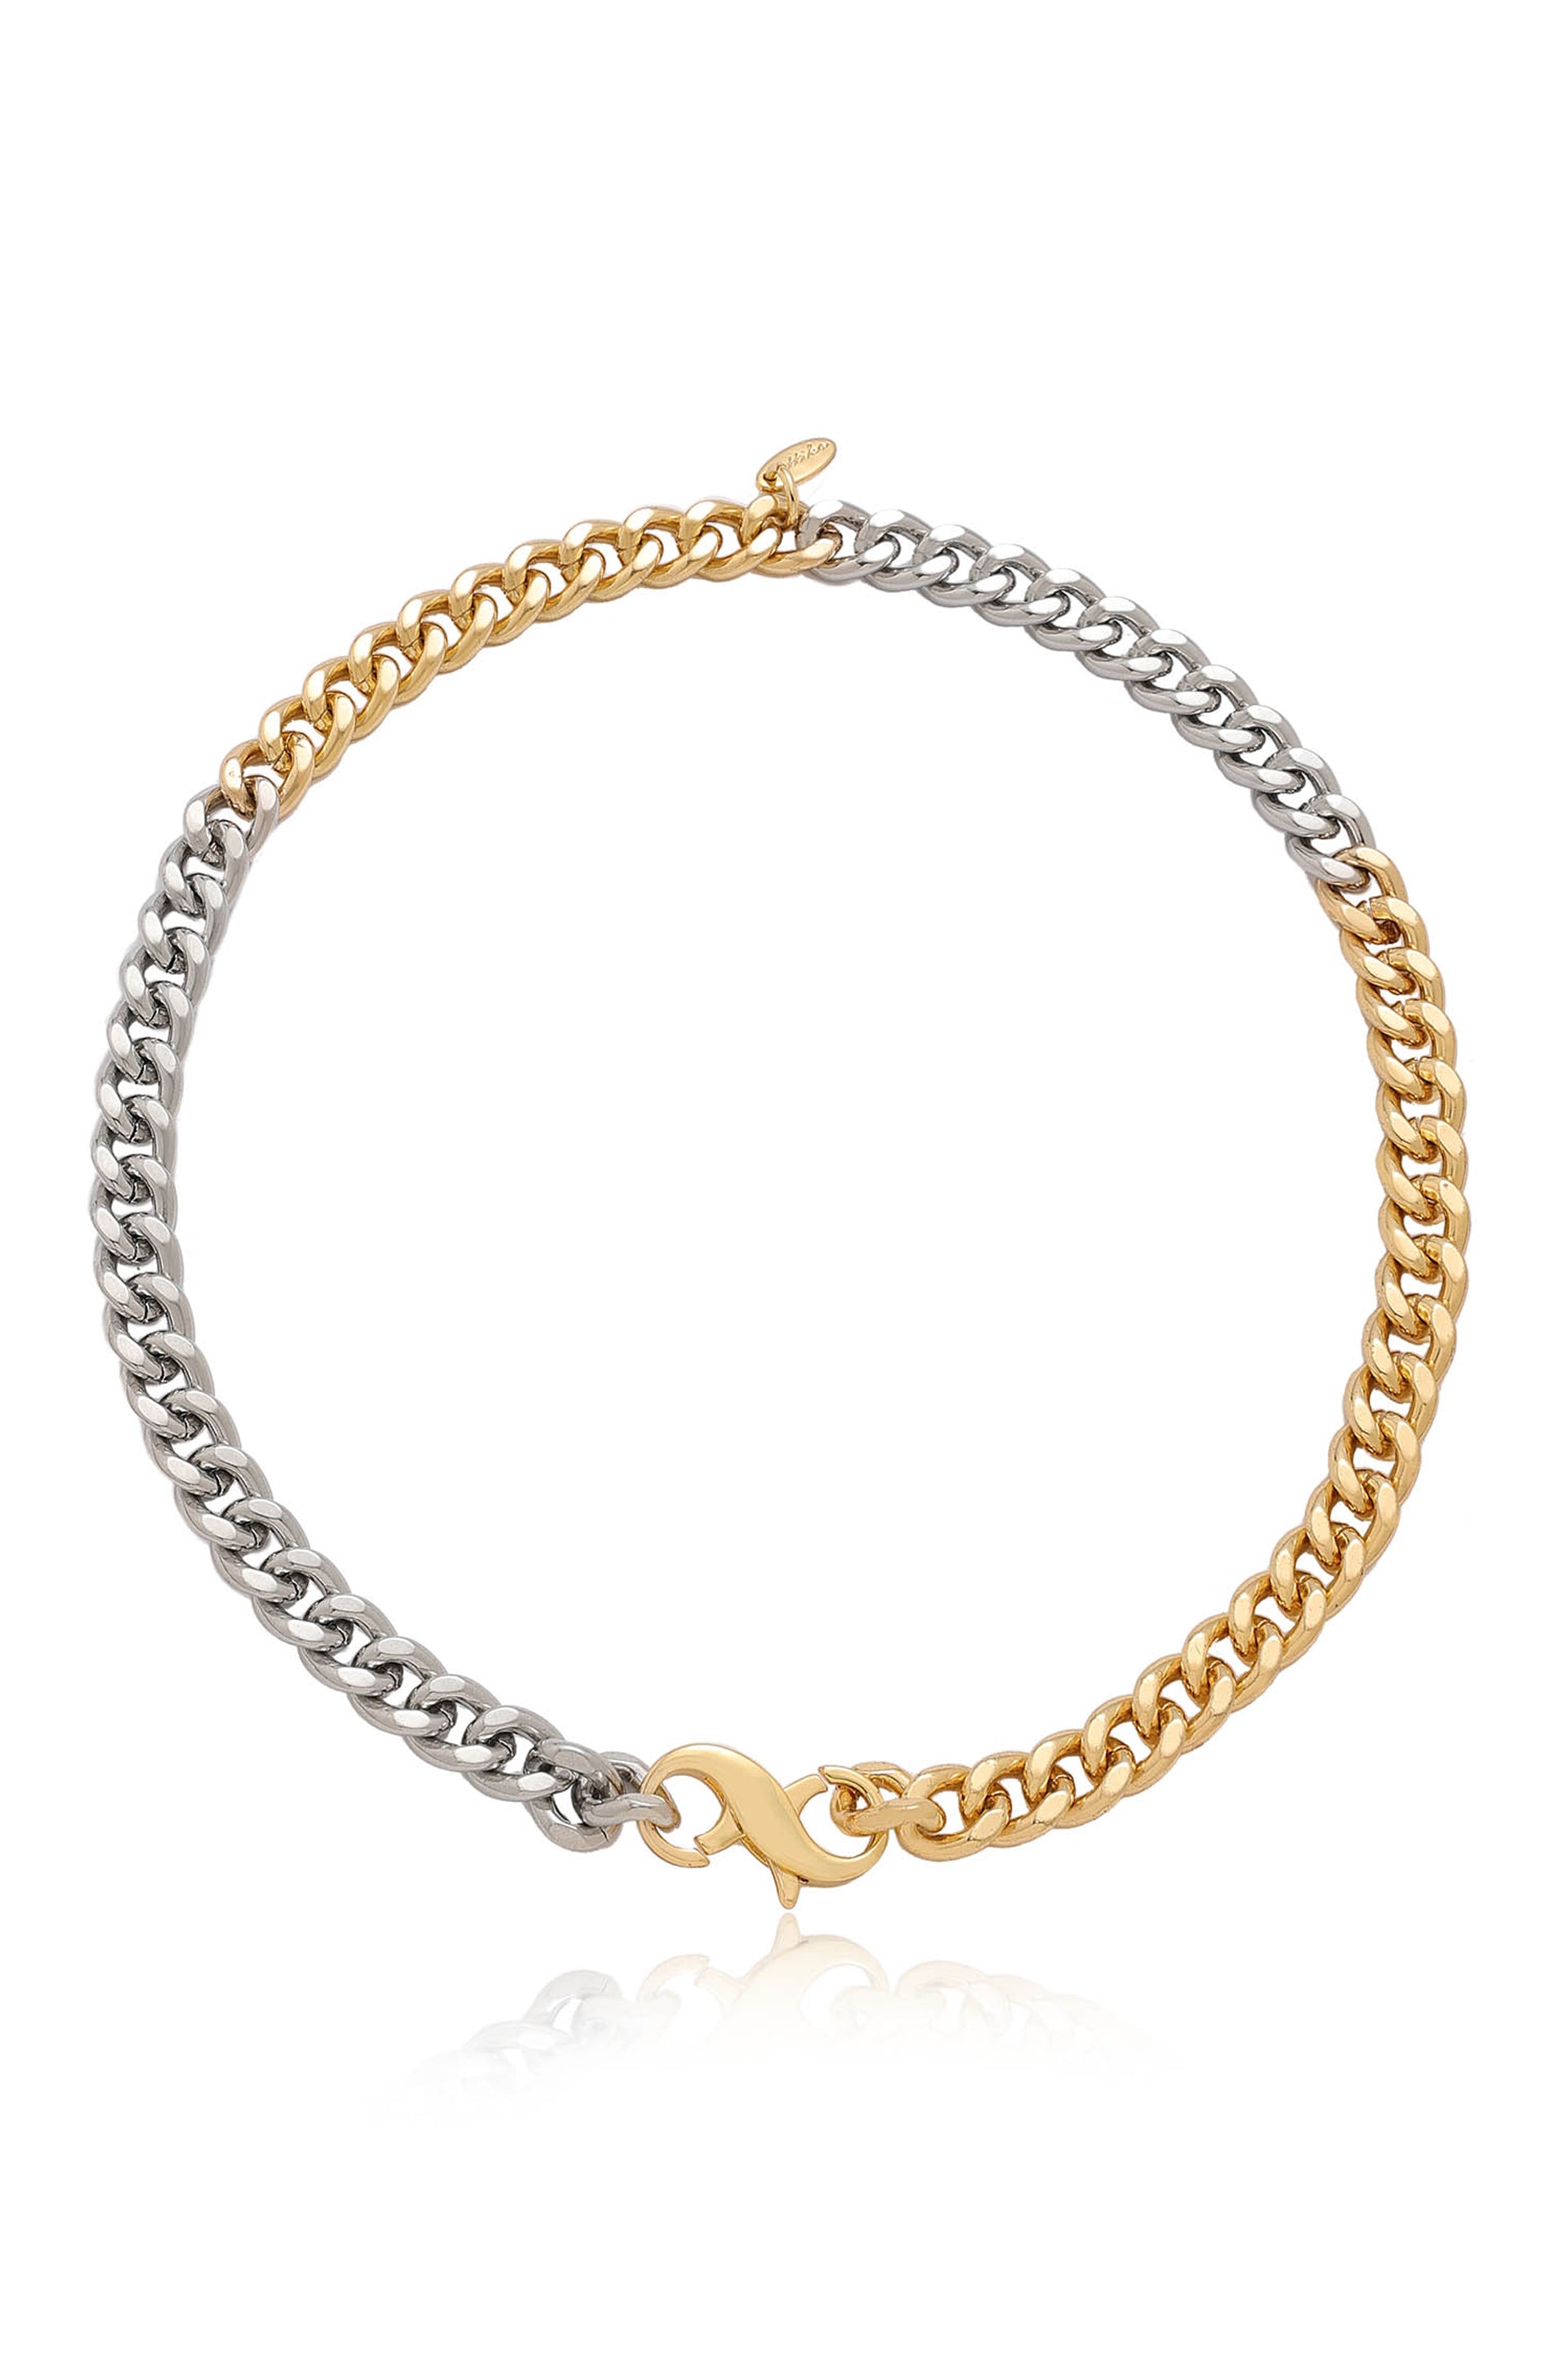 Mixed Metal Chain Link Necklace rhodium and gold